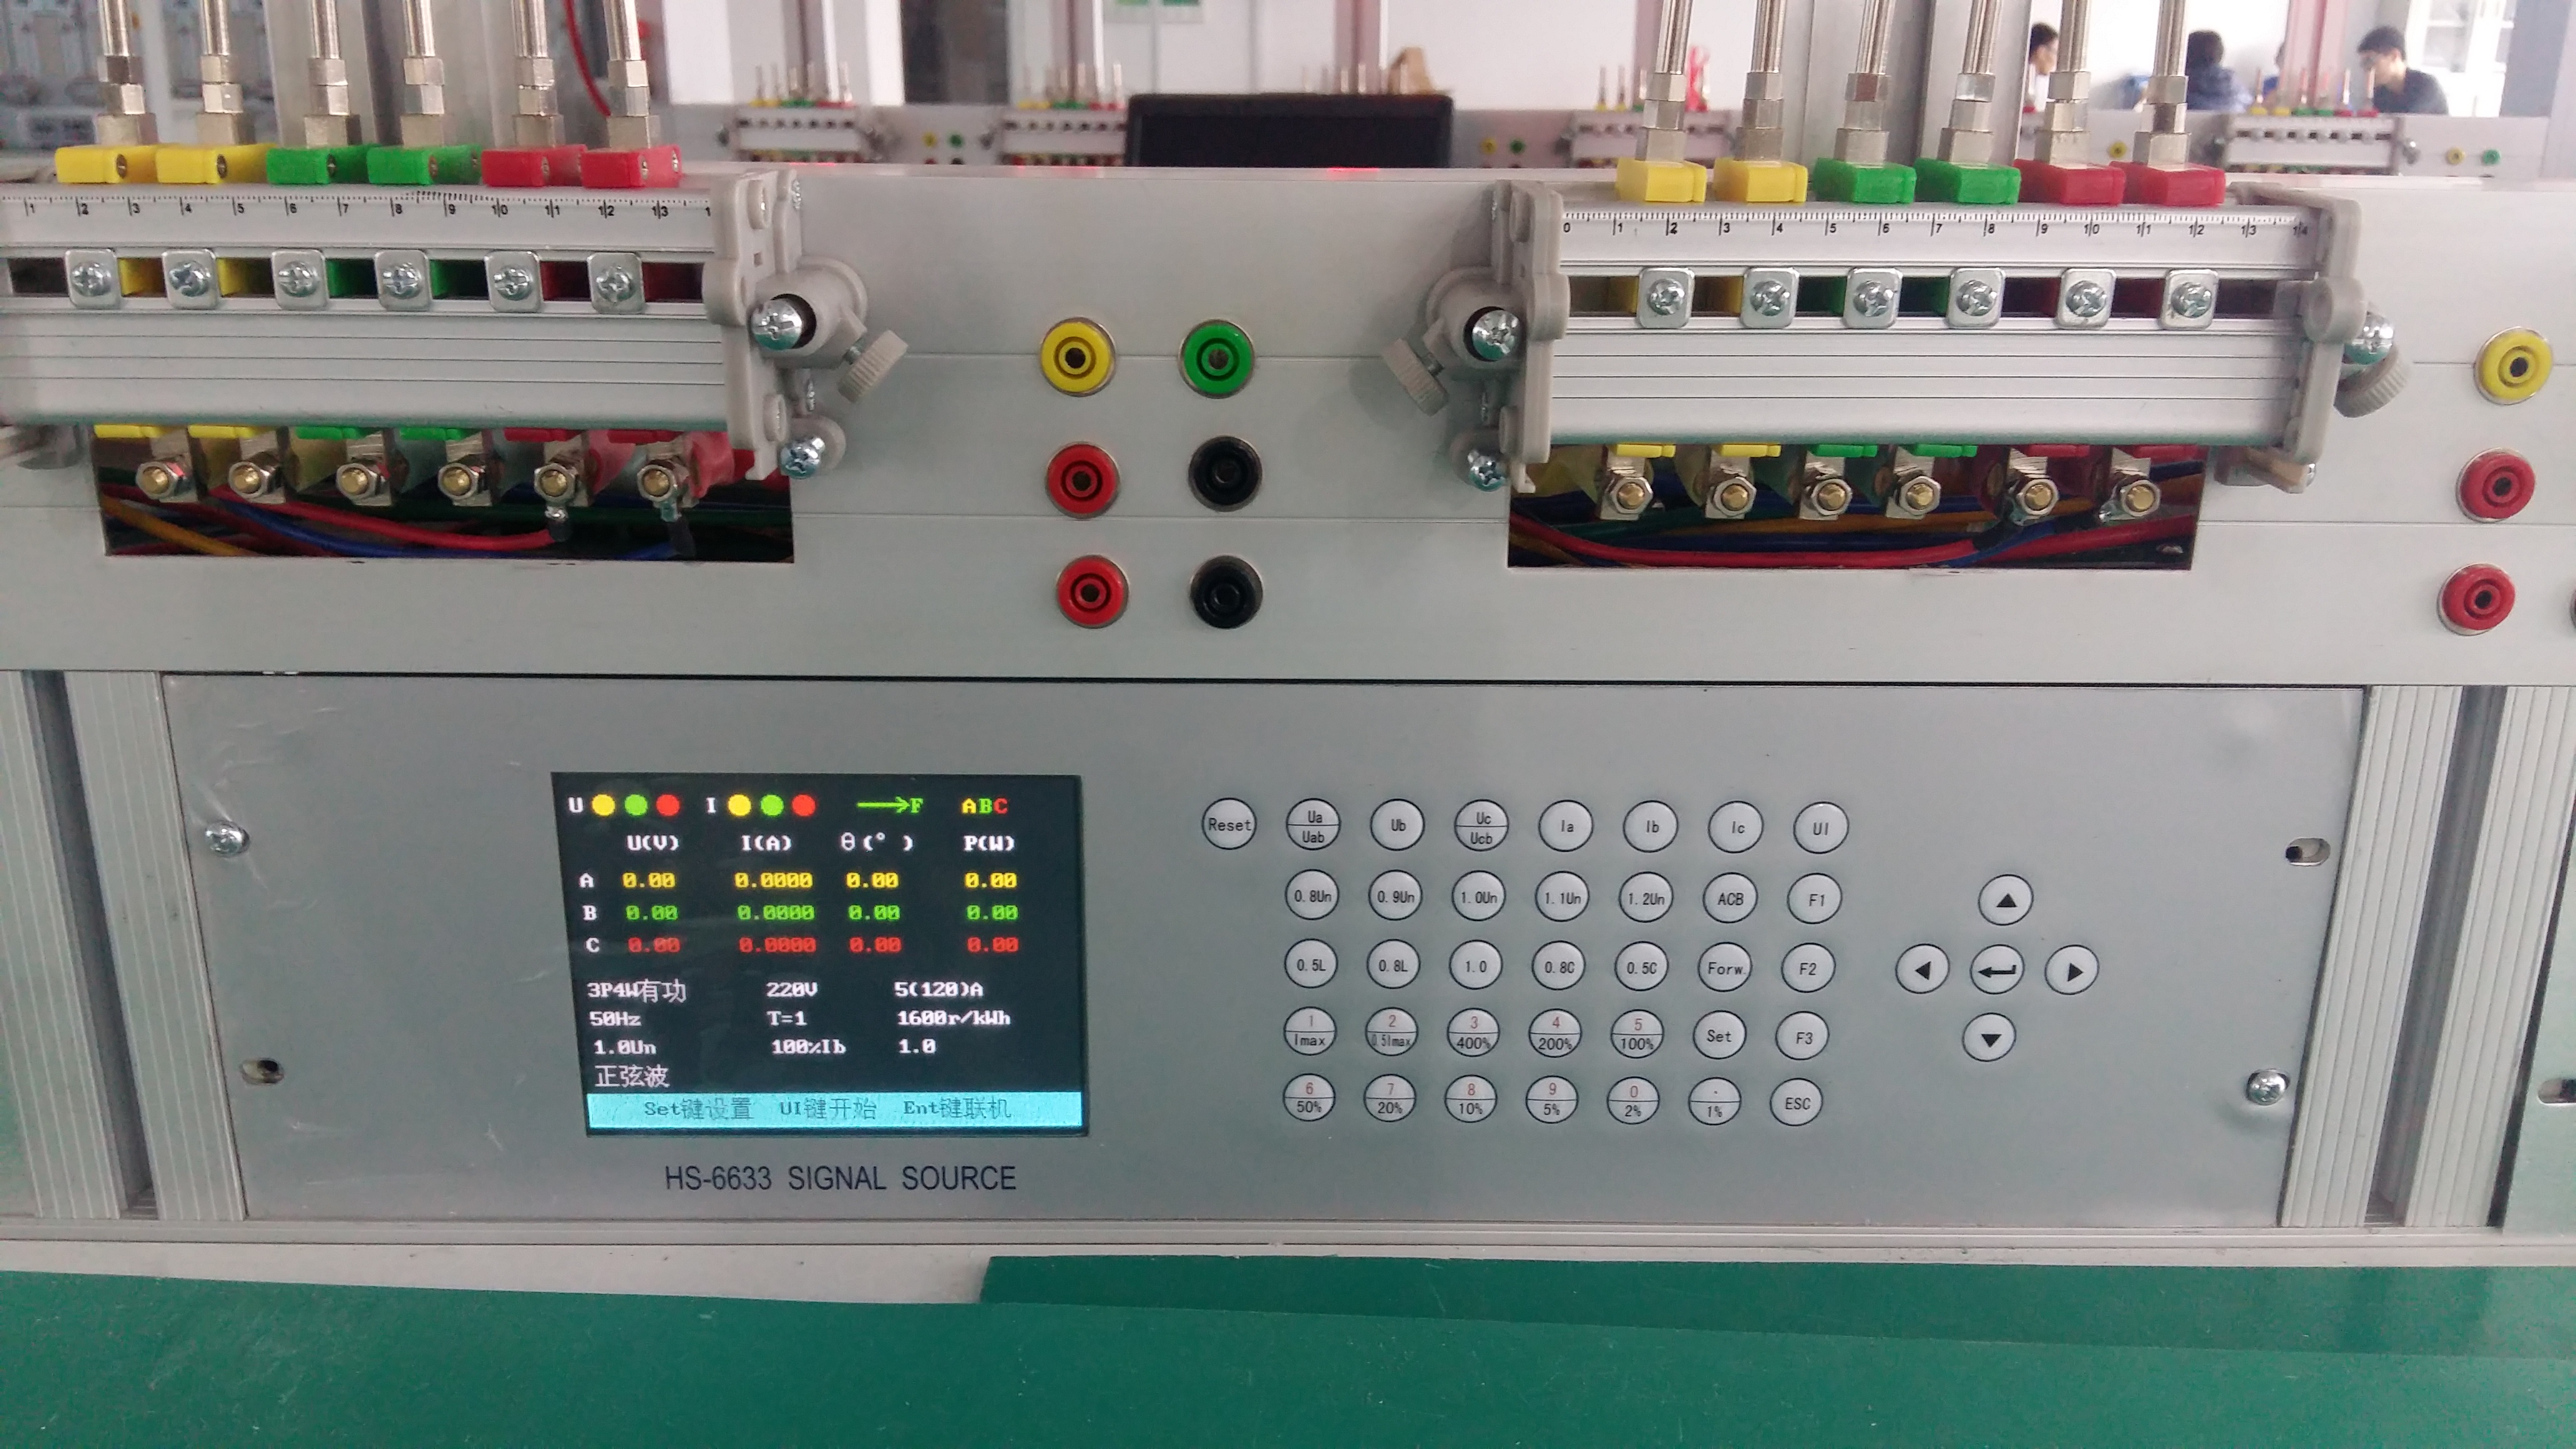 HS-6303E Three Phase KWH Meter Test Bench 16 pcs Accuracy class 0.05%, 57.7-460 Voltage 0-100 A current 45-65 Hz